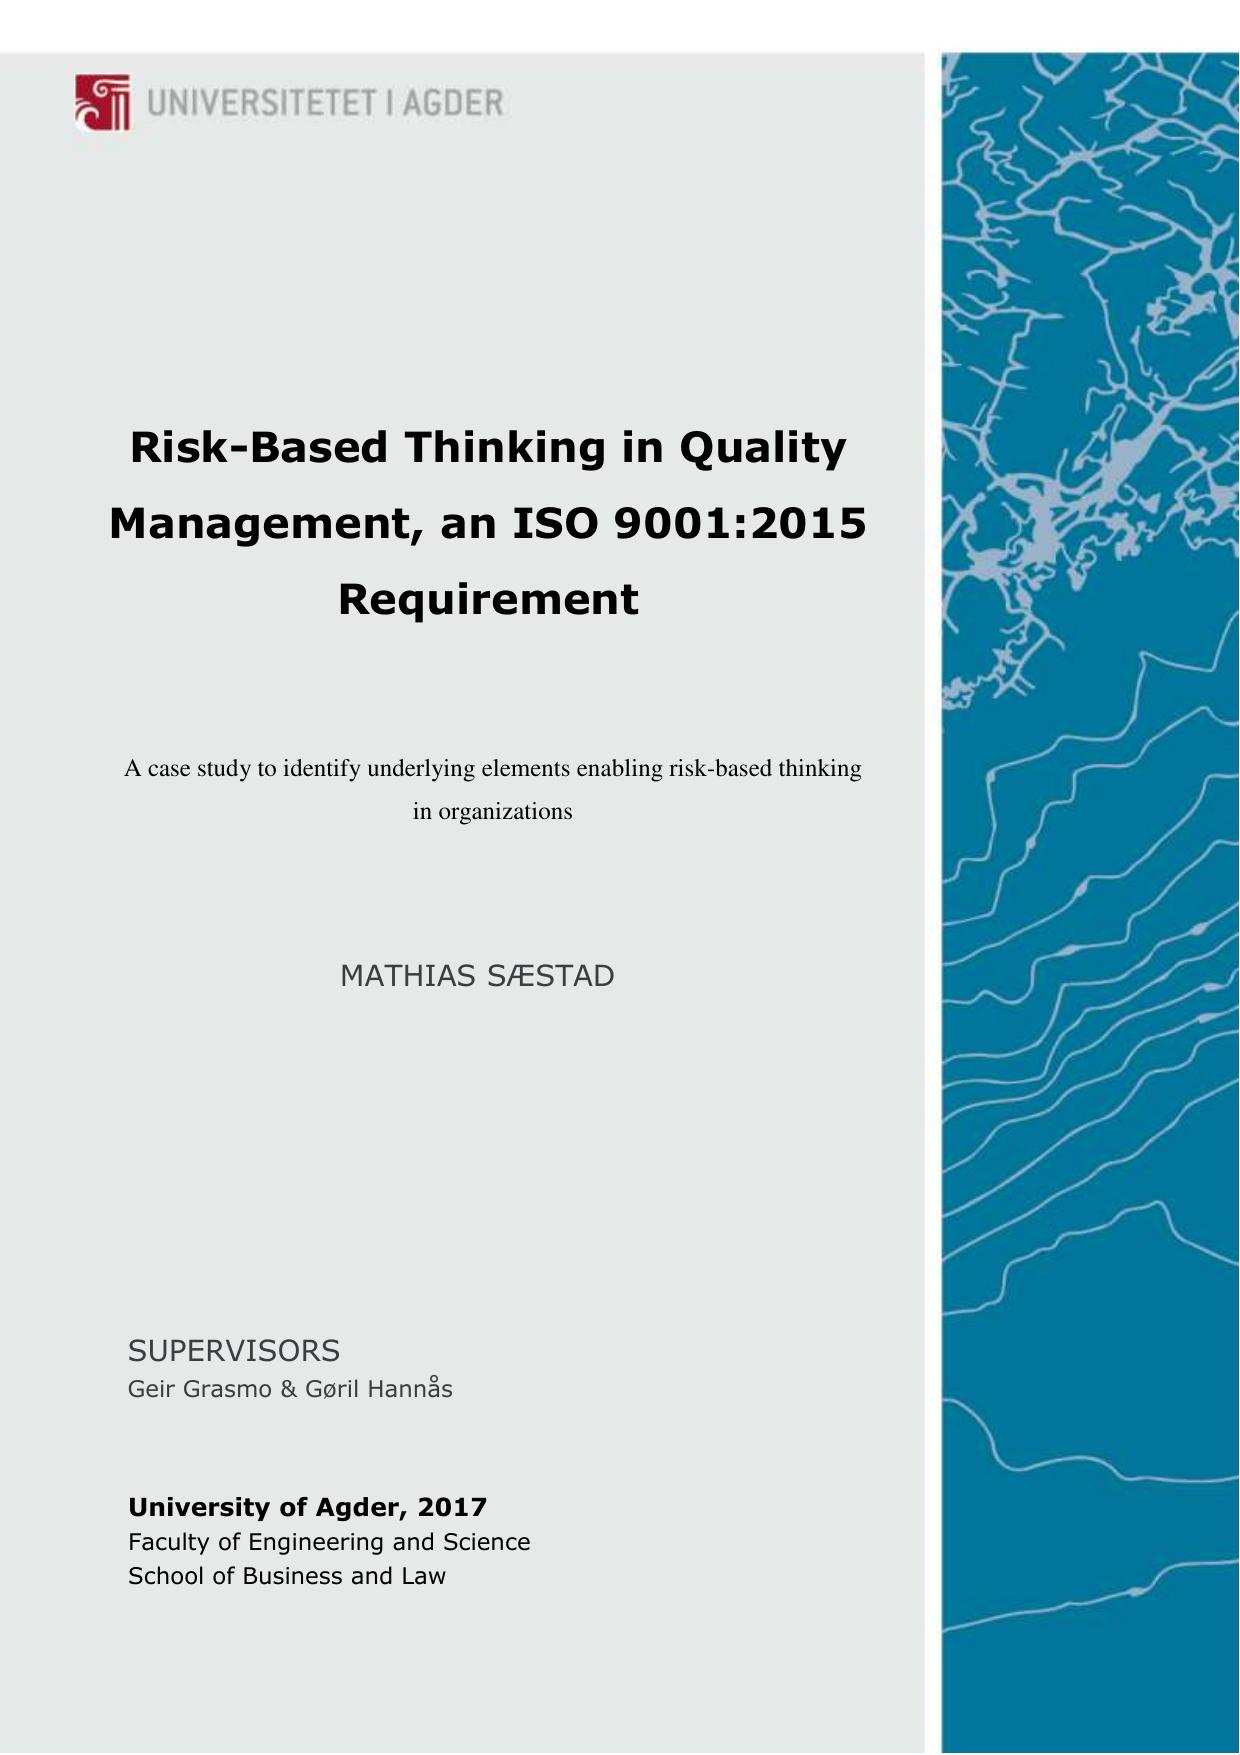 Risk-Based Thinking in Quality Management, an ISO 9001 2015 Requirement ( PDFDrive ) 2017